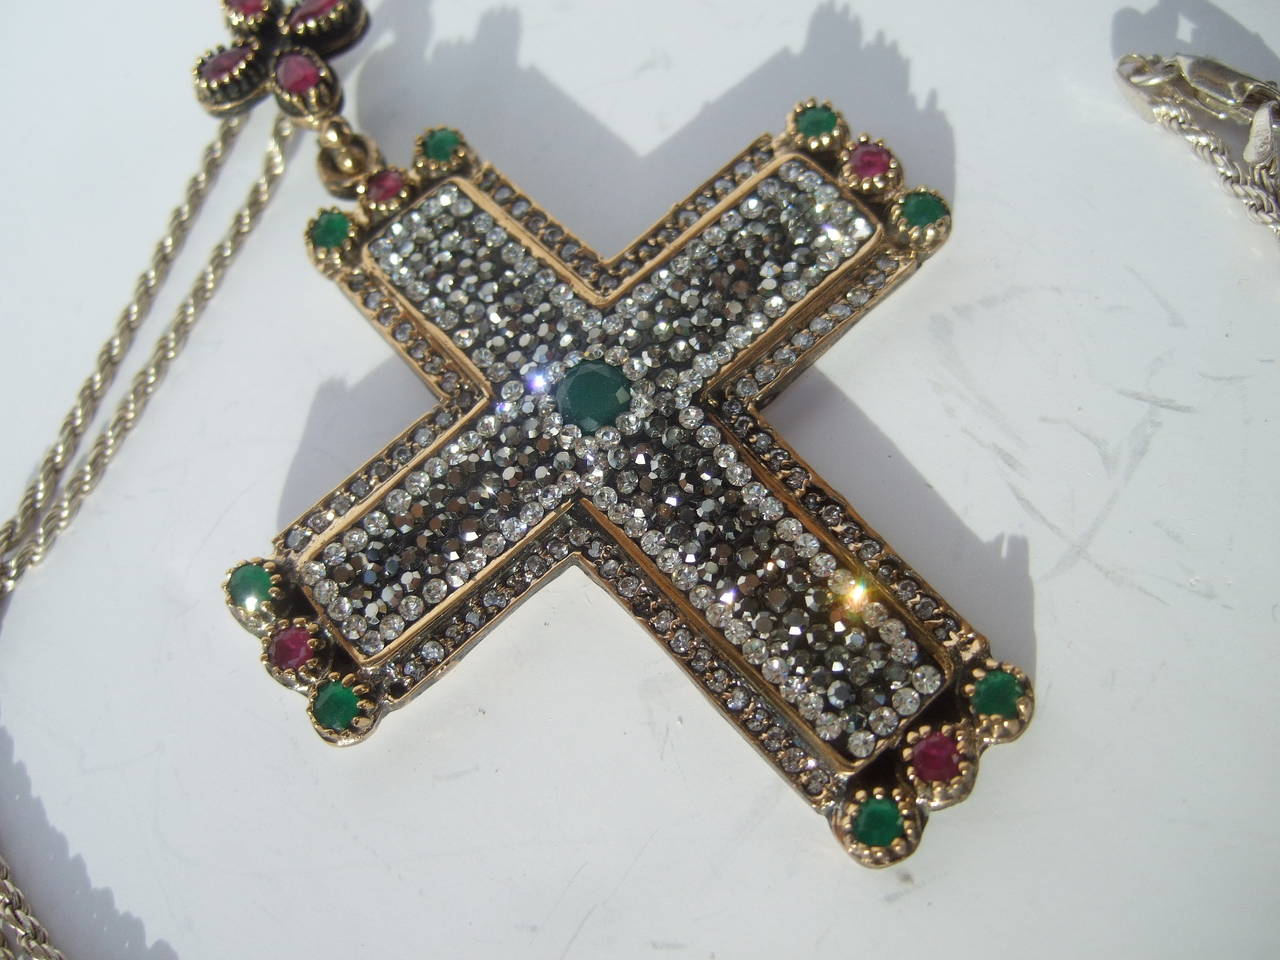 Sterling large crystal & semiprecious jeweled cross pendant necklace
The ornate jeweled cross is encrusted with glittering crystals. The center & borders of the cross are embellished with deep pink & emerald green color semi precious man made